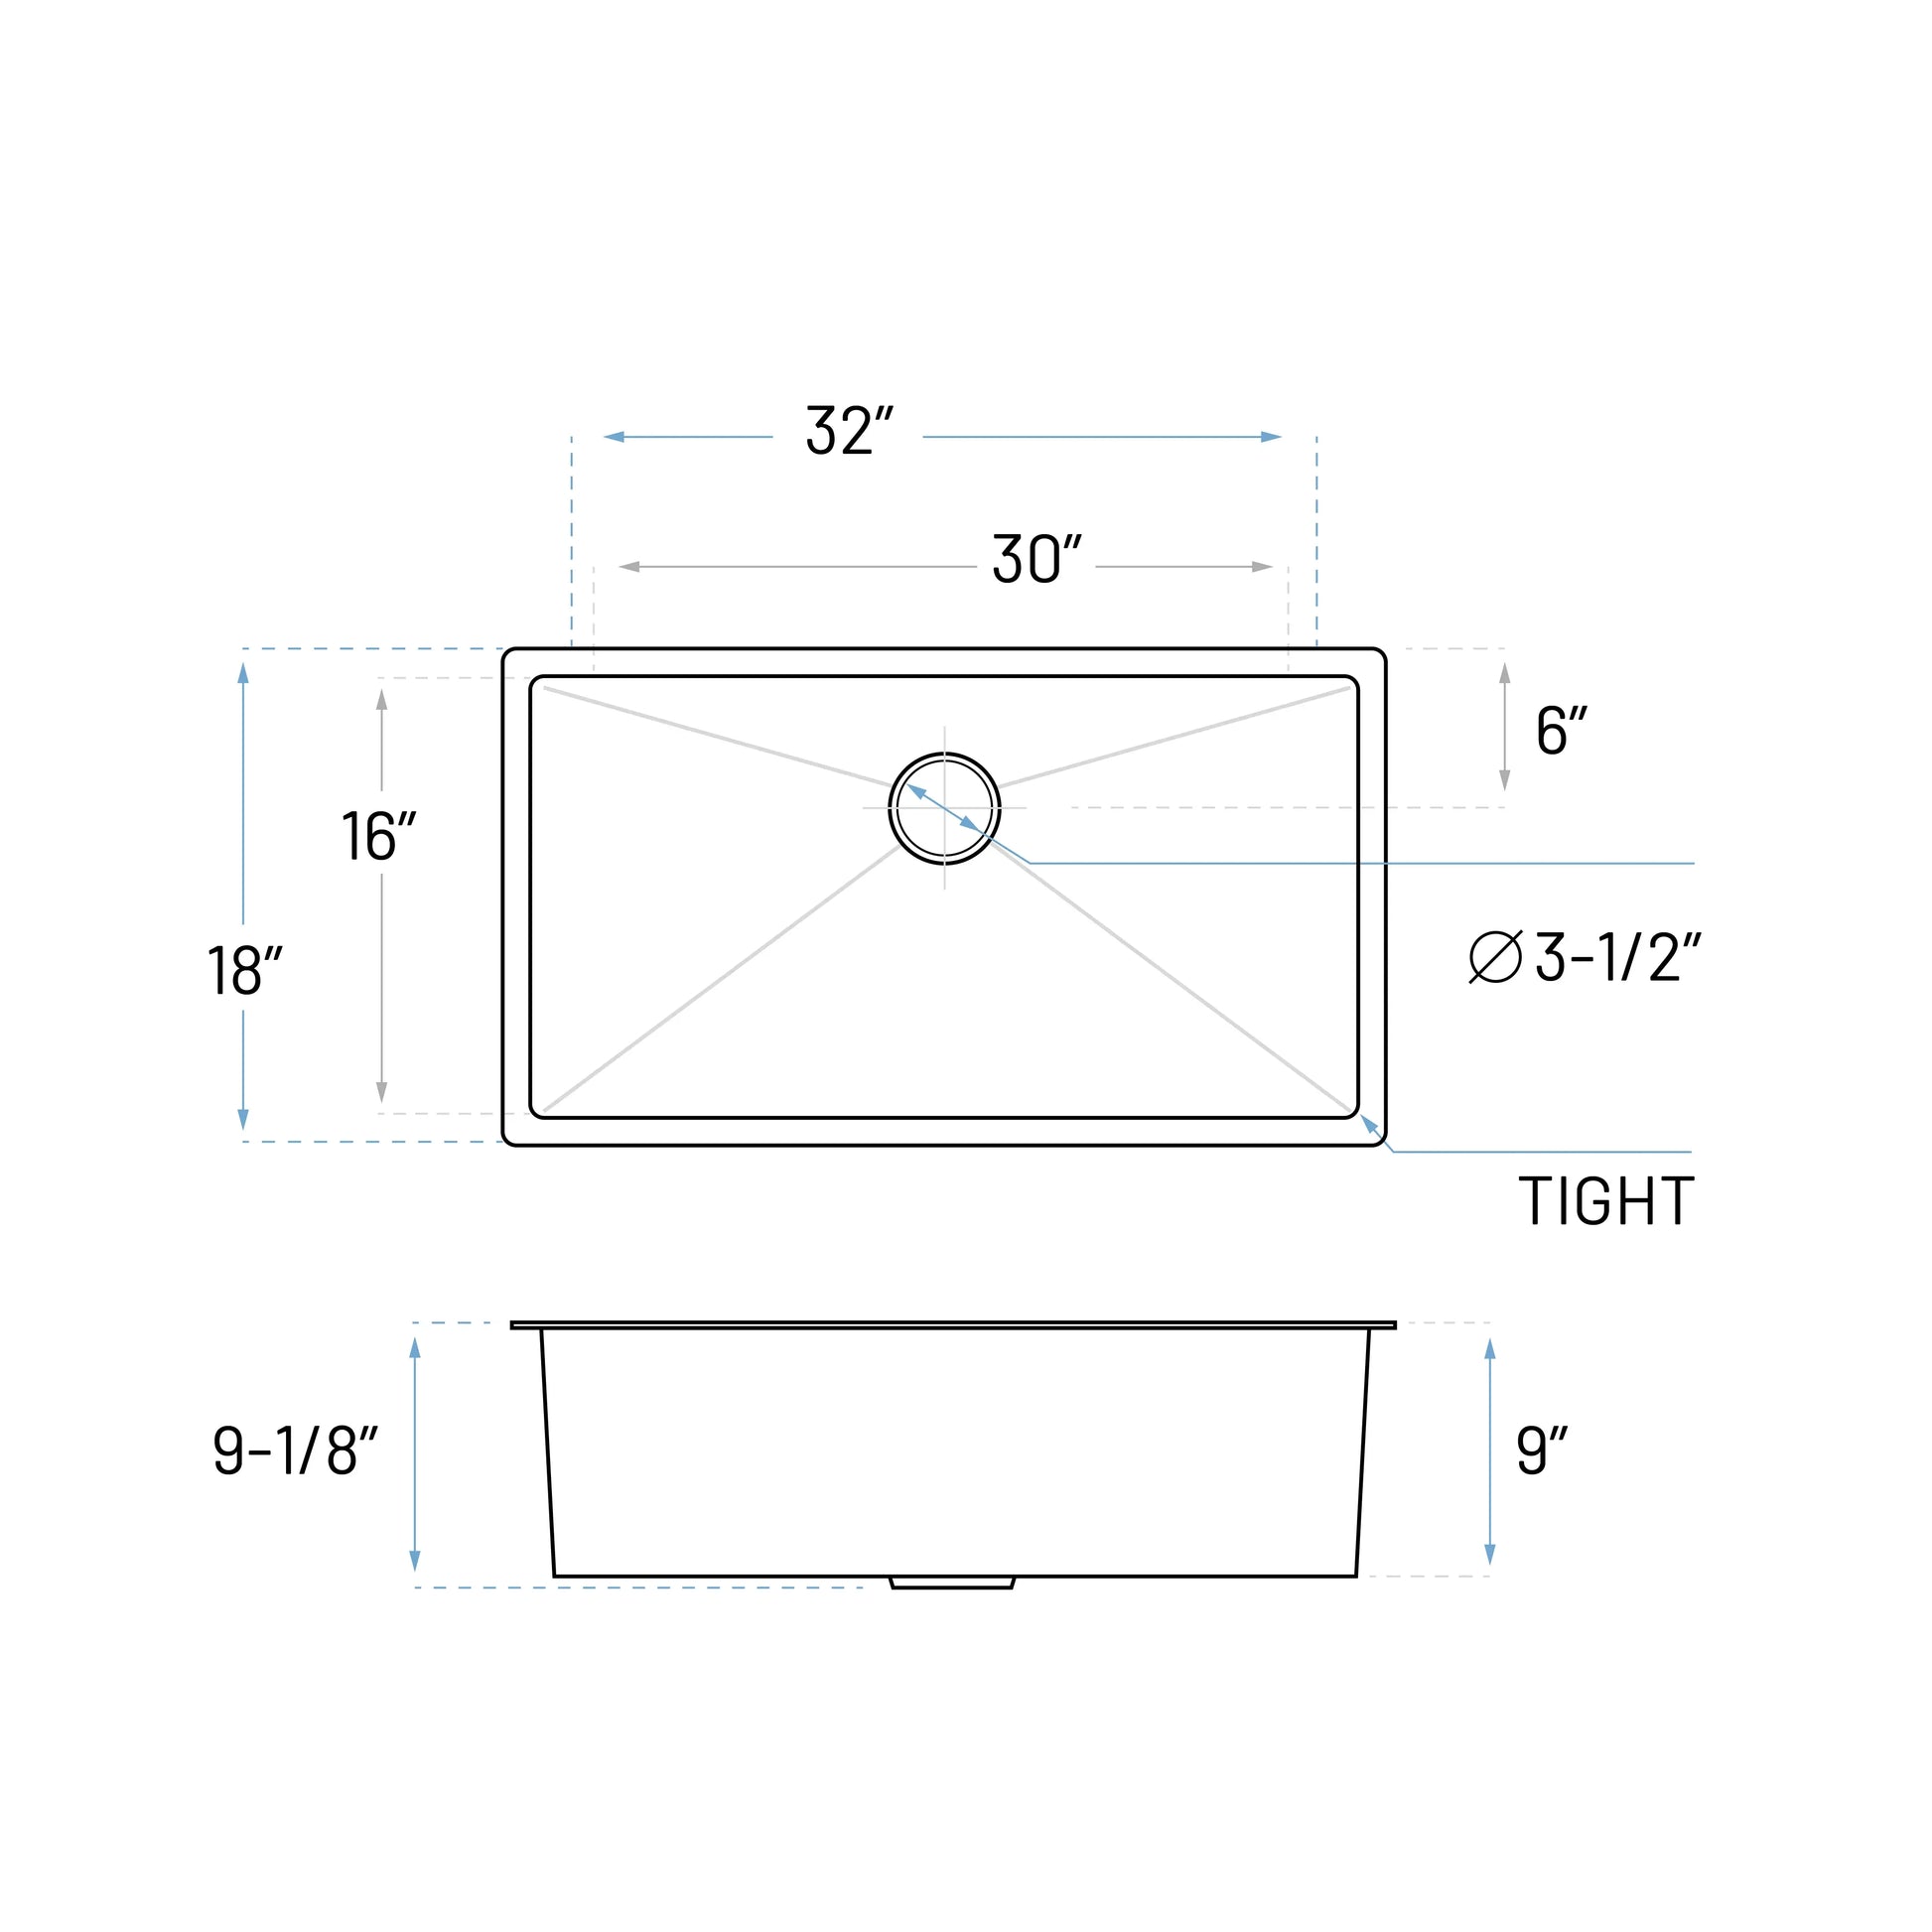 Technical Drawing of Handmade Stainless Steel Kitchen Sink